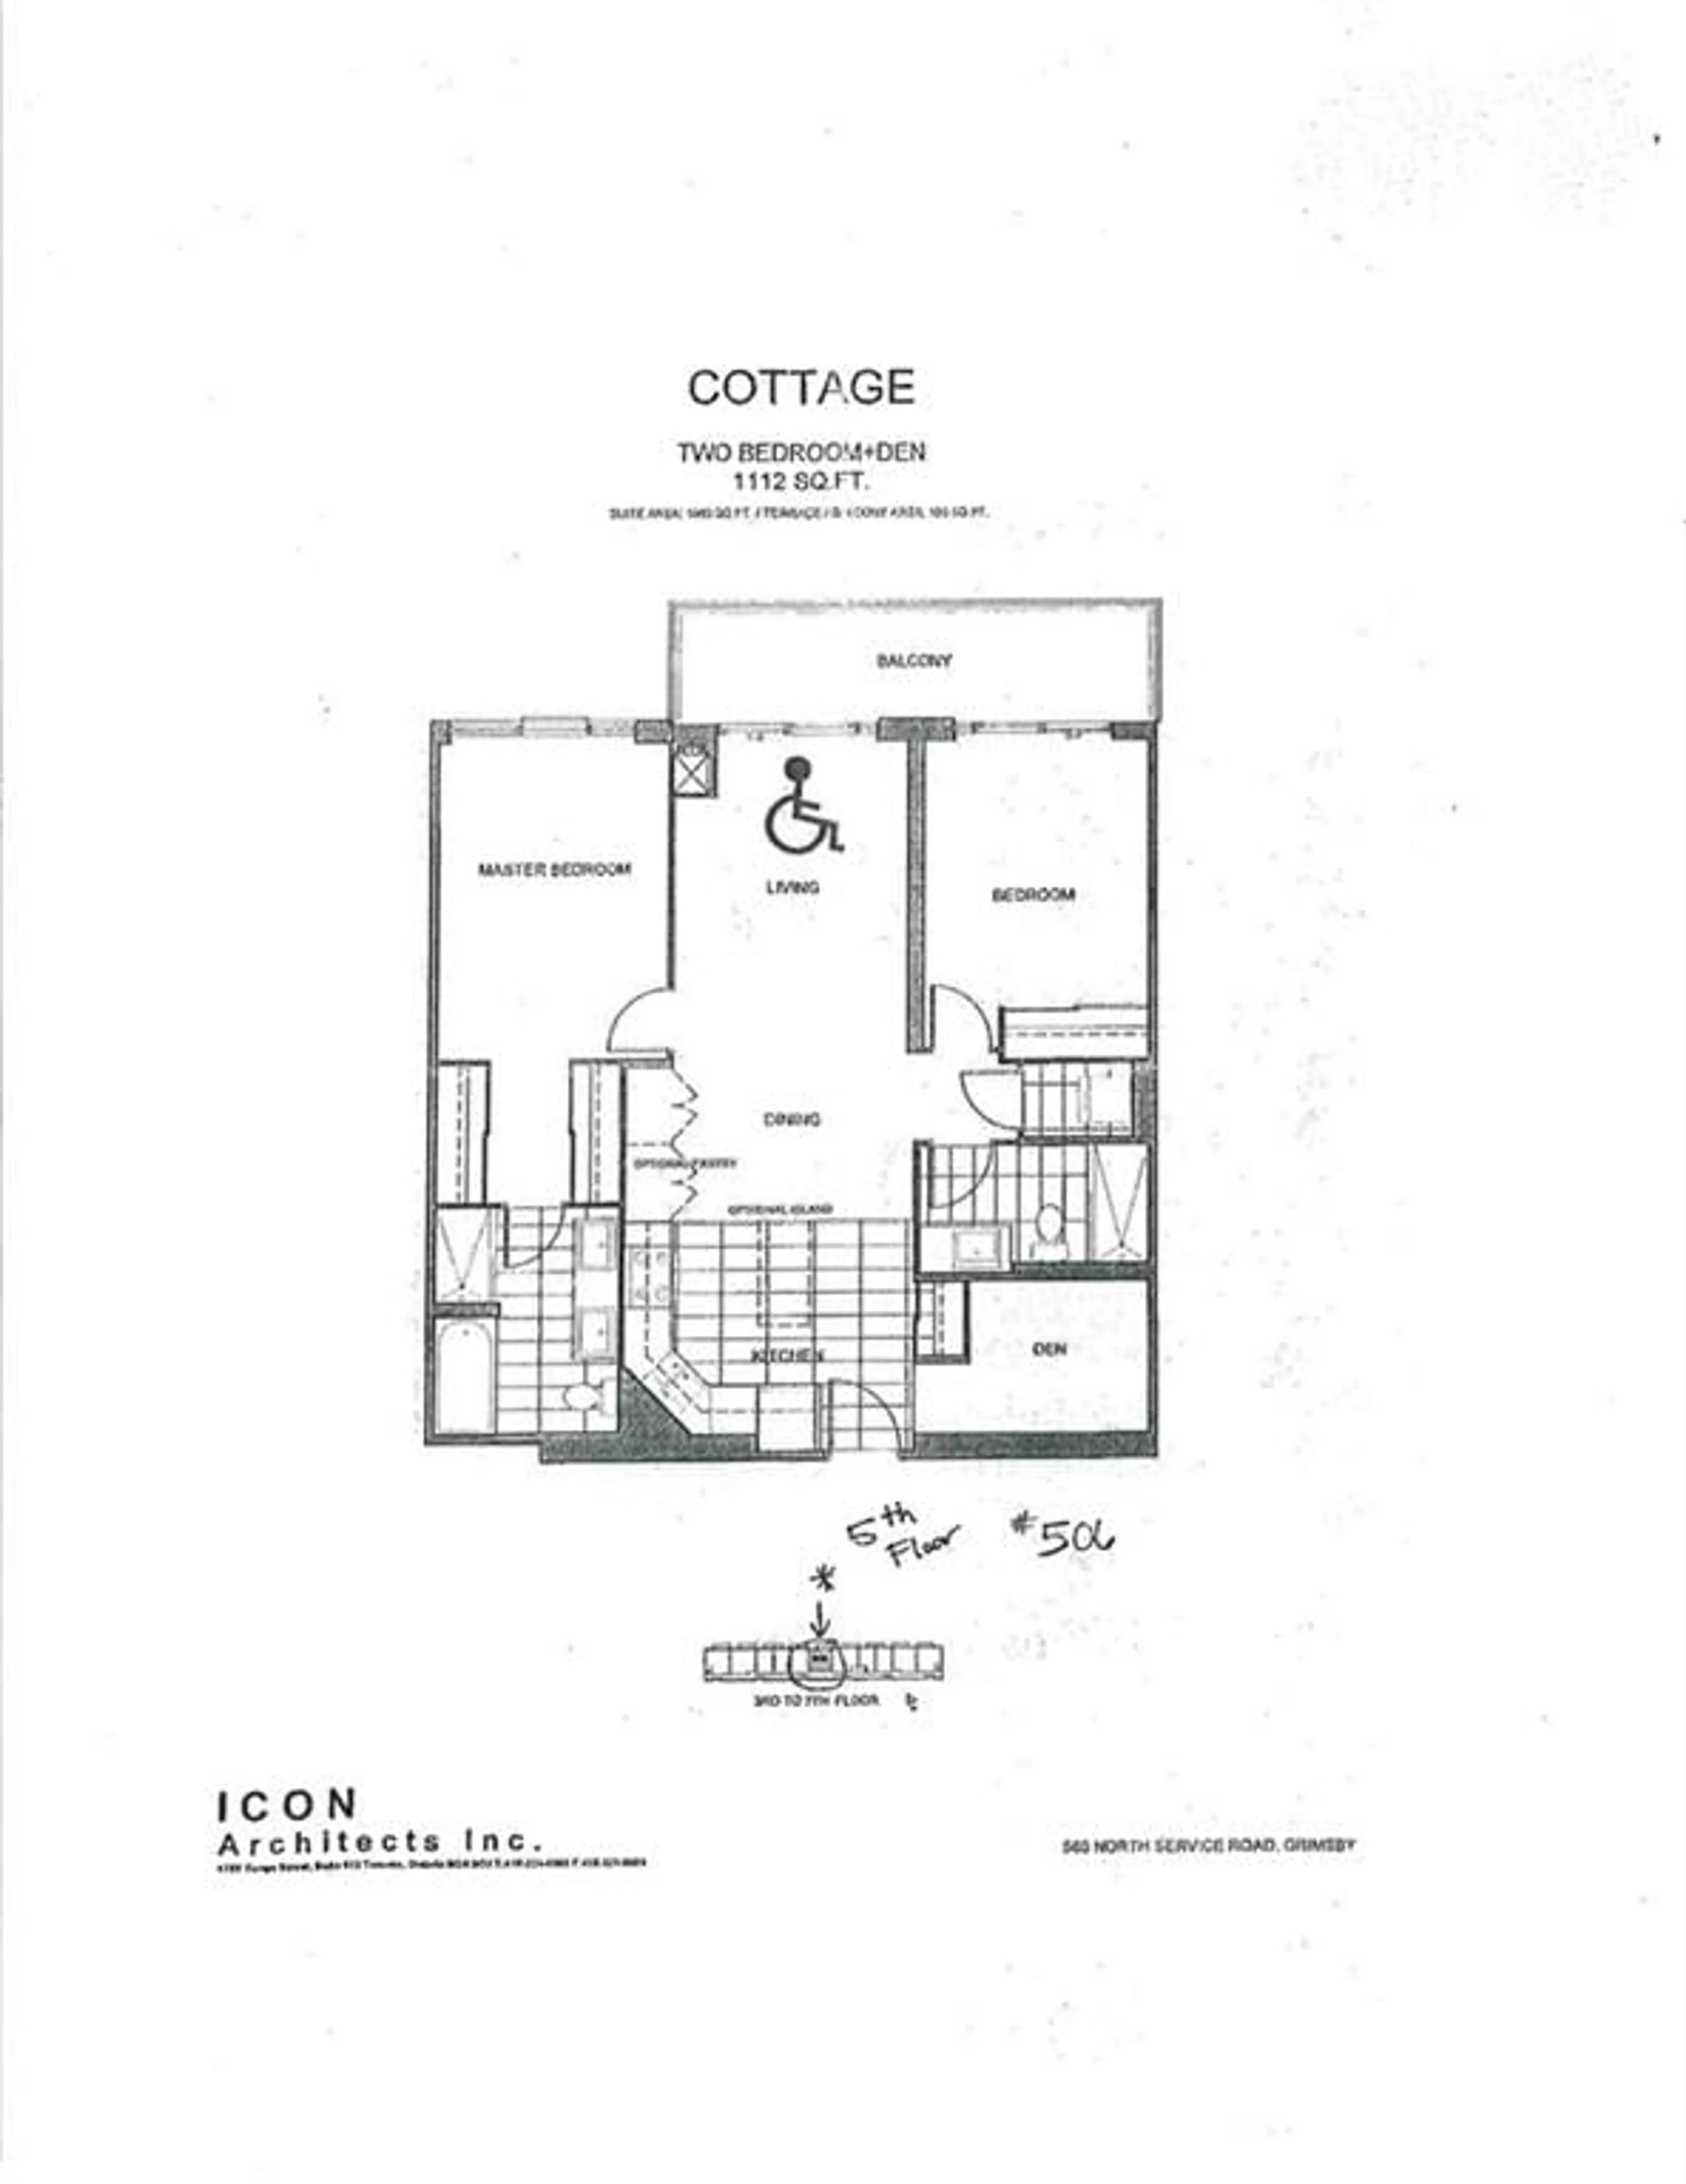 Floor plan for 560 North Service Rd #506, Grimsby Ontario L3M 1M0